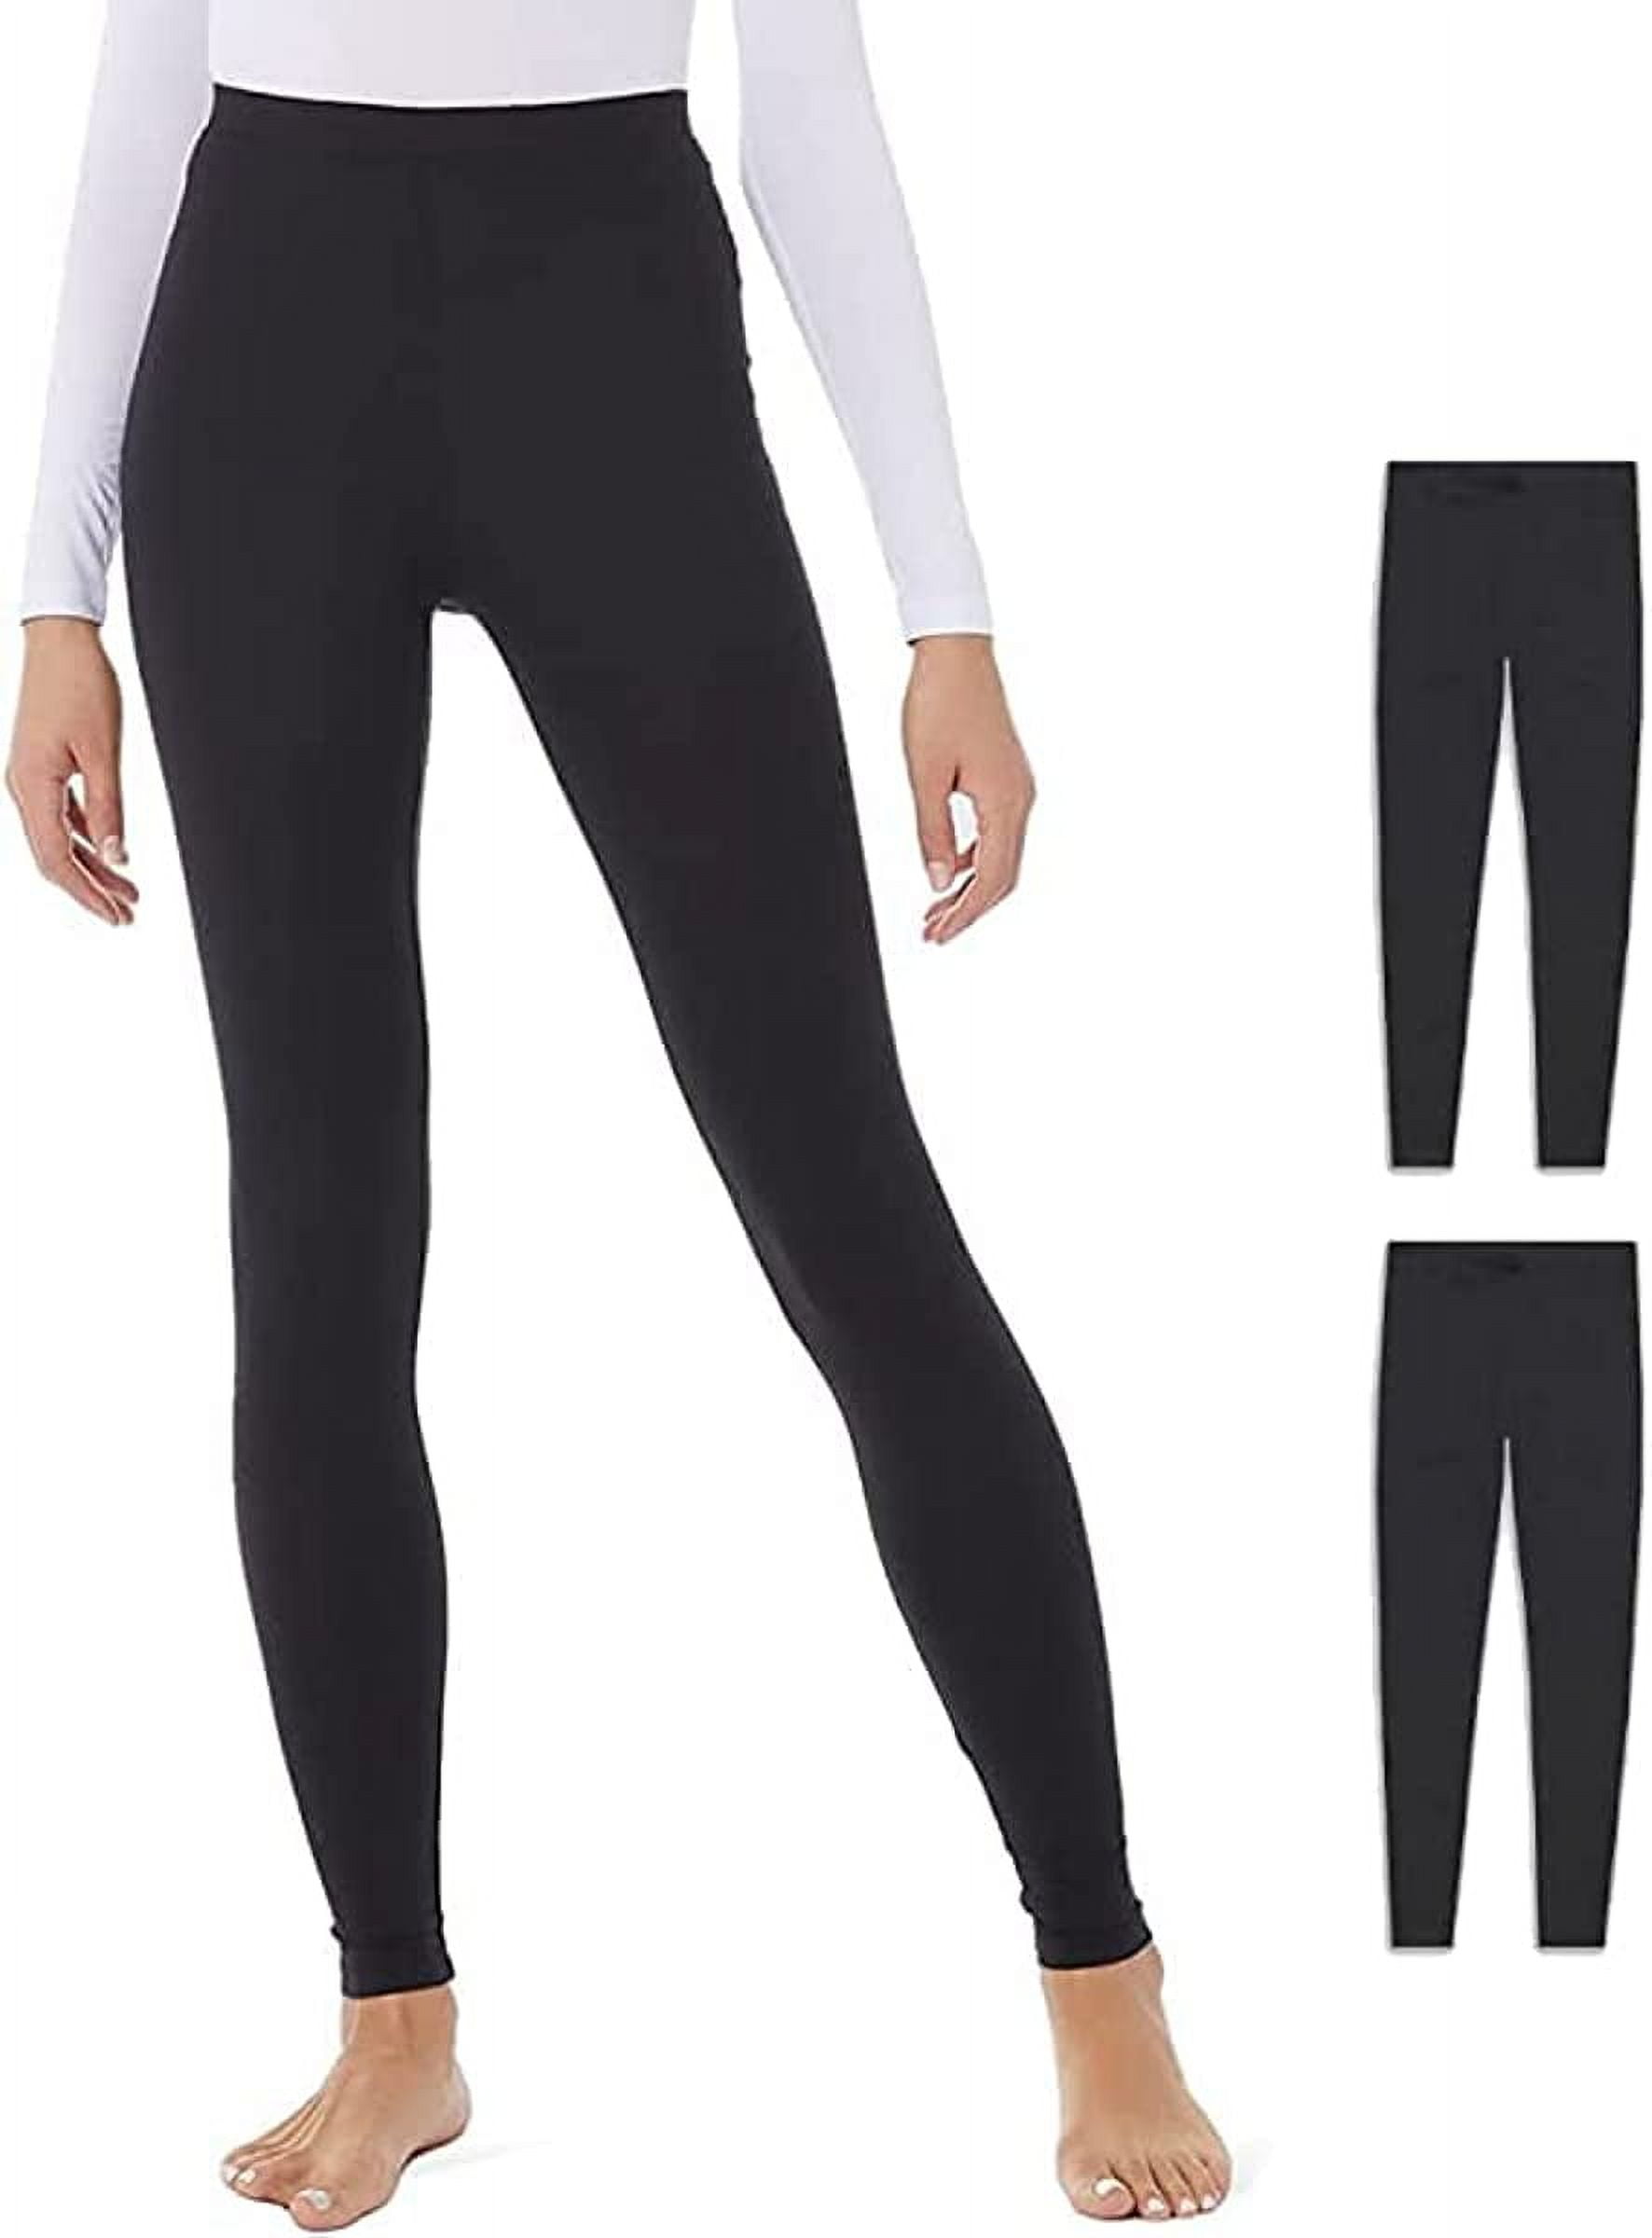 Cold Weather Running Tights